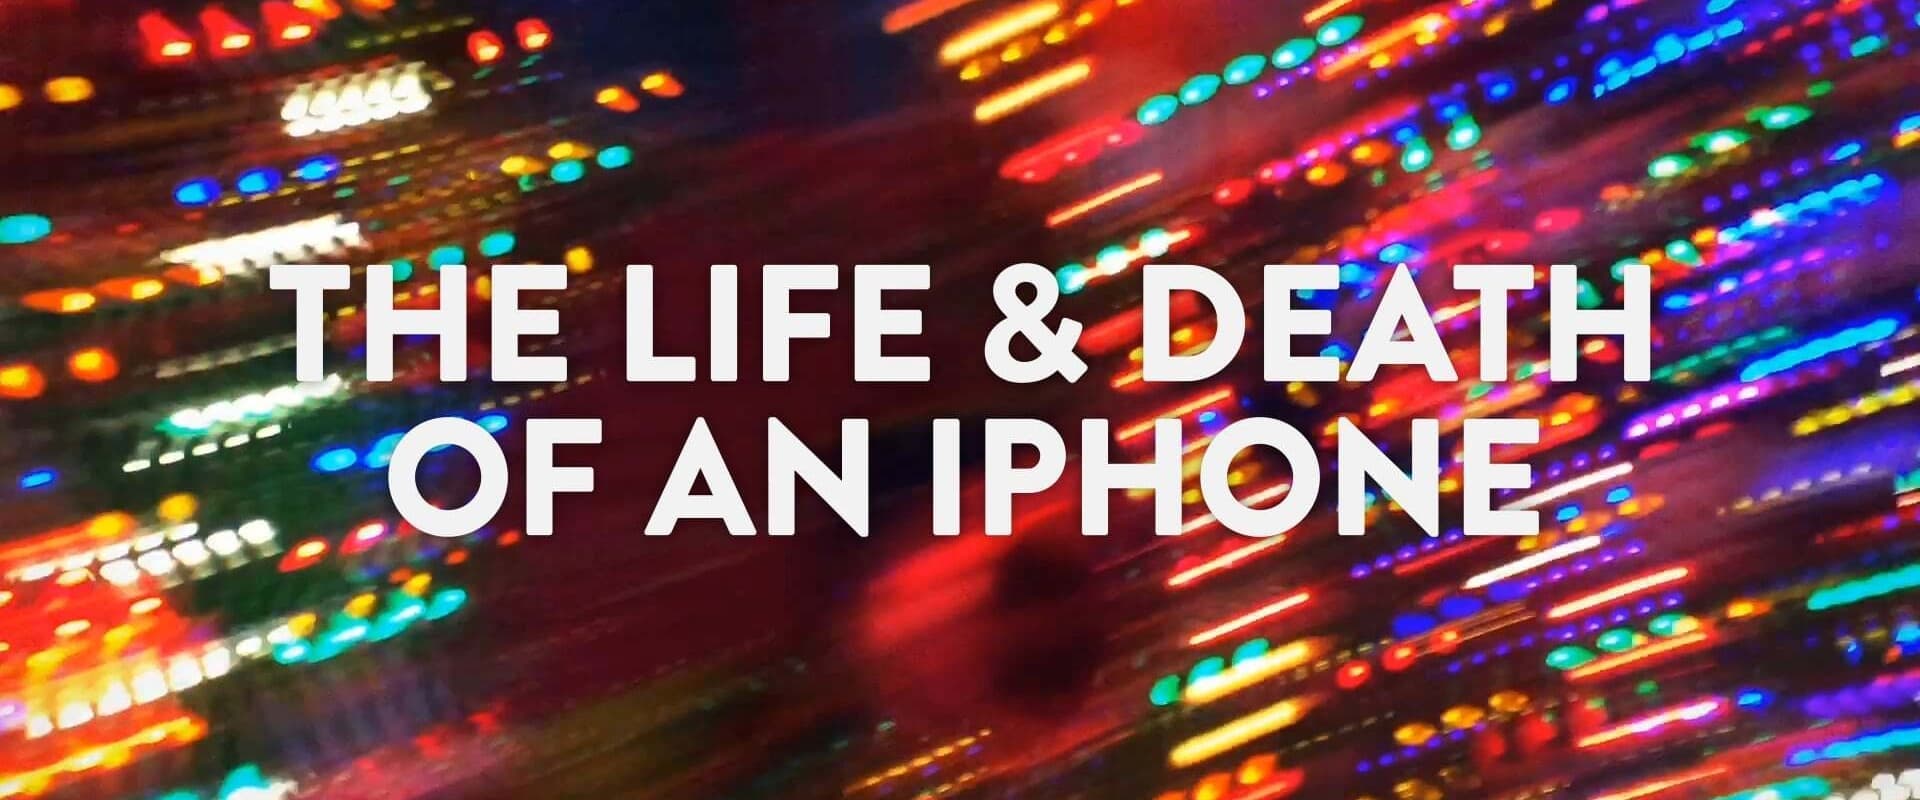 The Life & Death of an iPhone